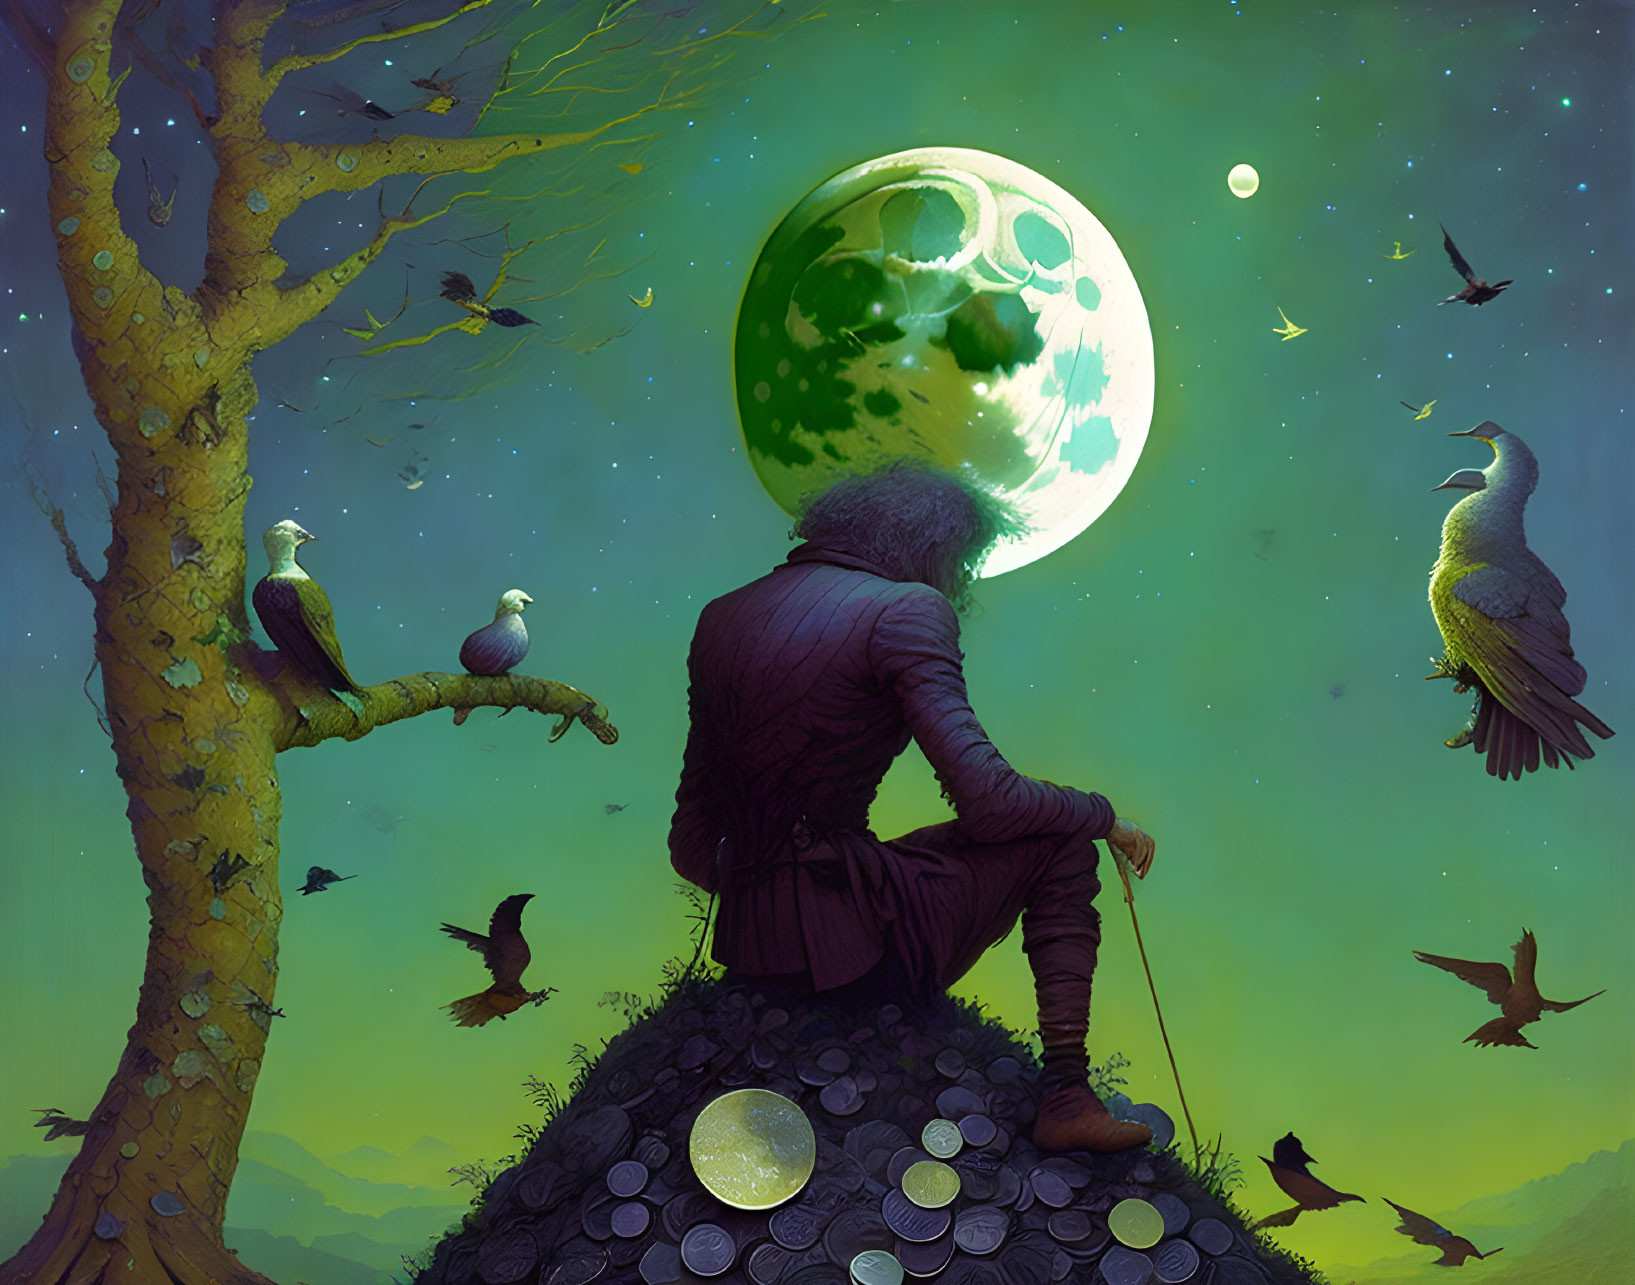 Person under tree gazes at green moon with birds and coins